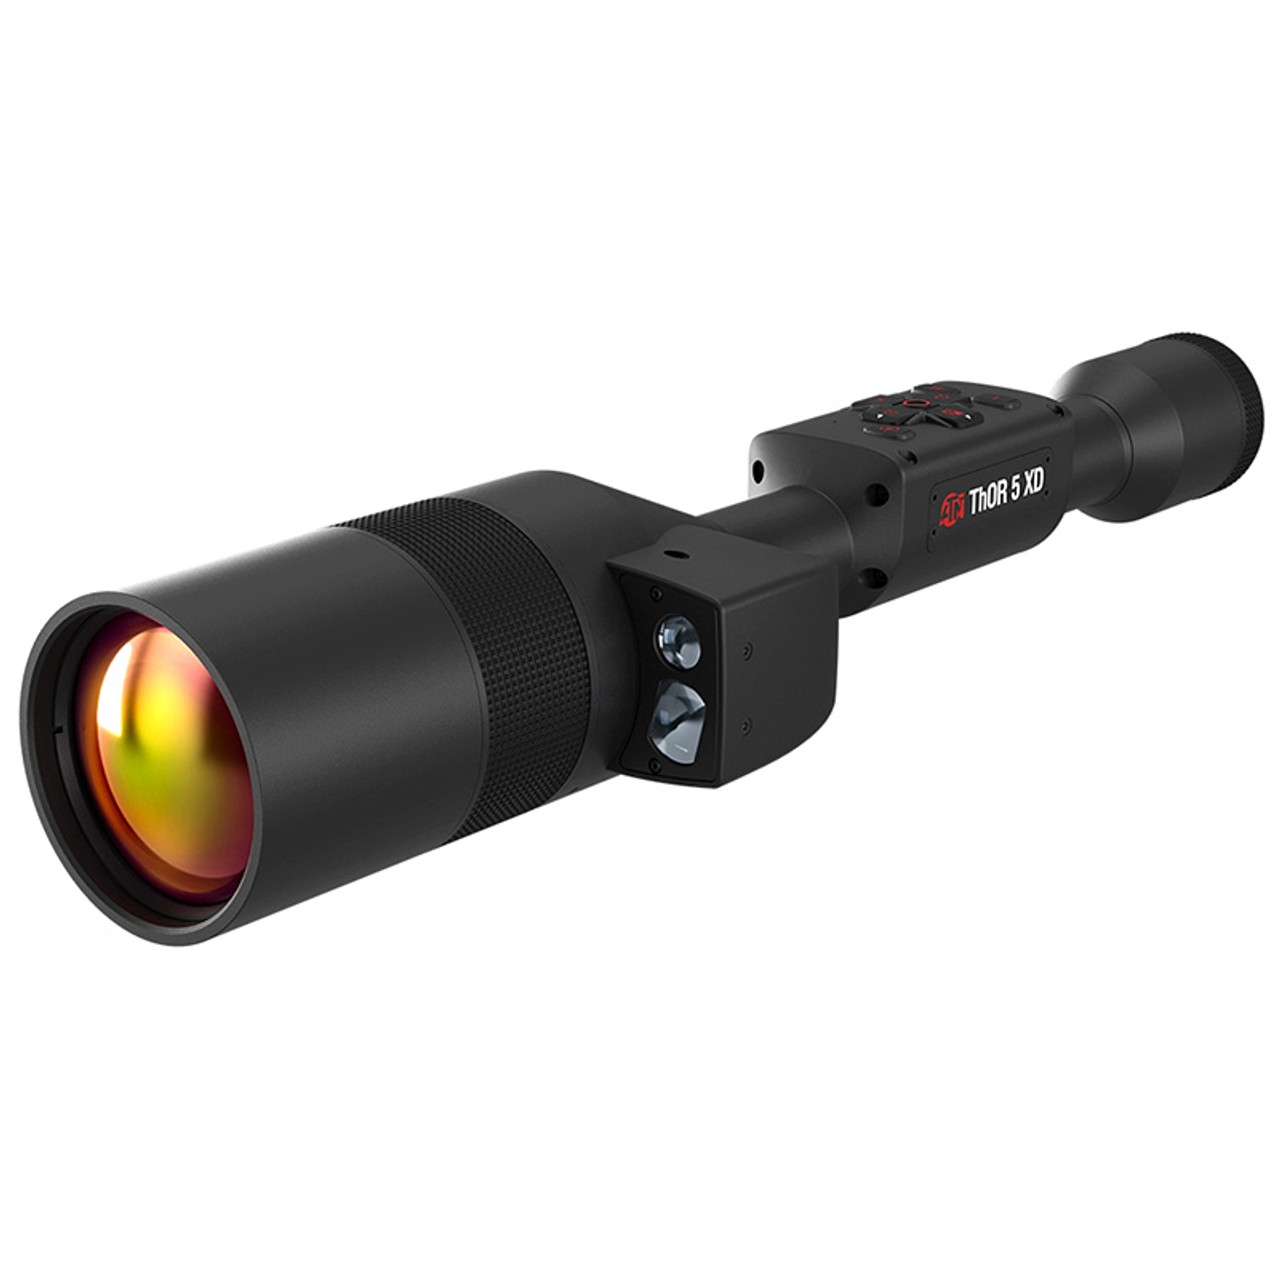 ThOR 5 XD LRF 4-40x Laser Rangefinding Thermal Rifle Scope by ATN